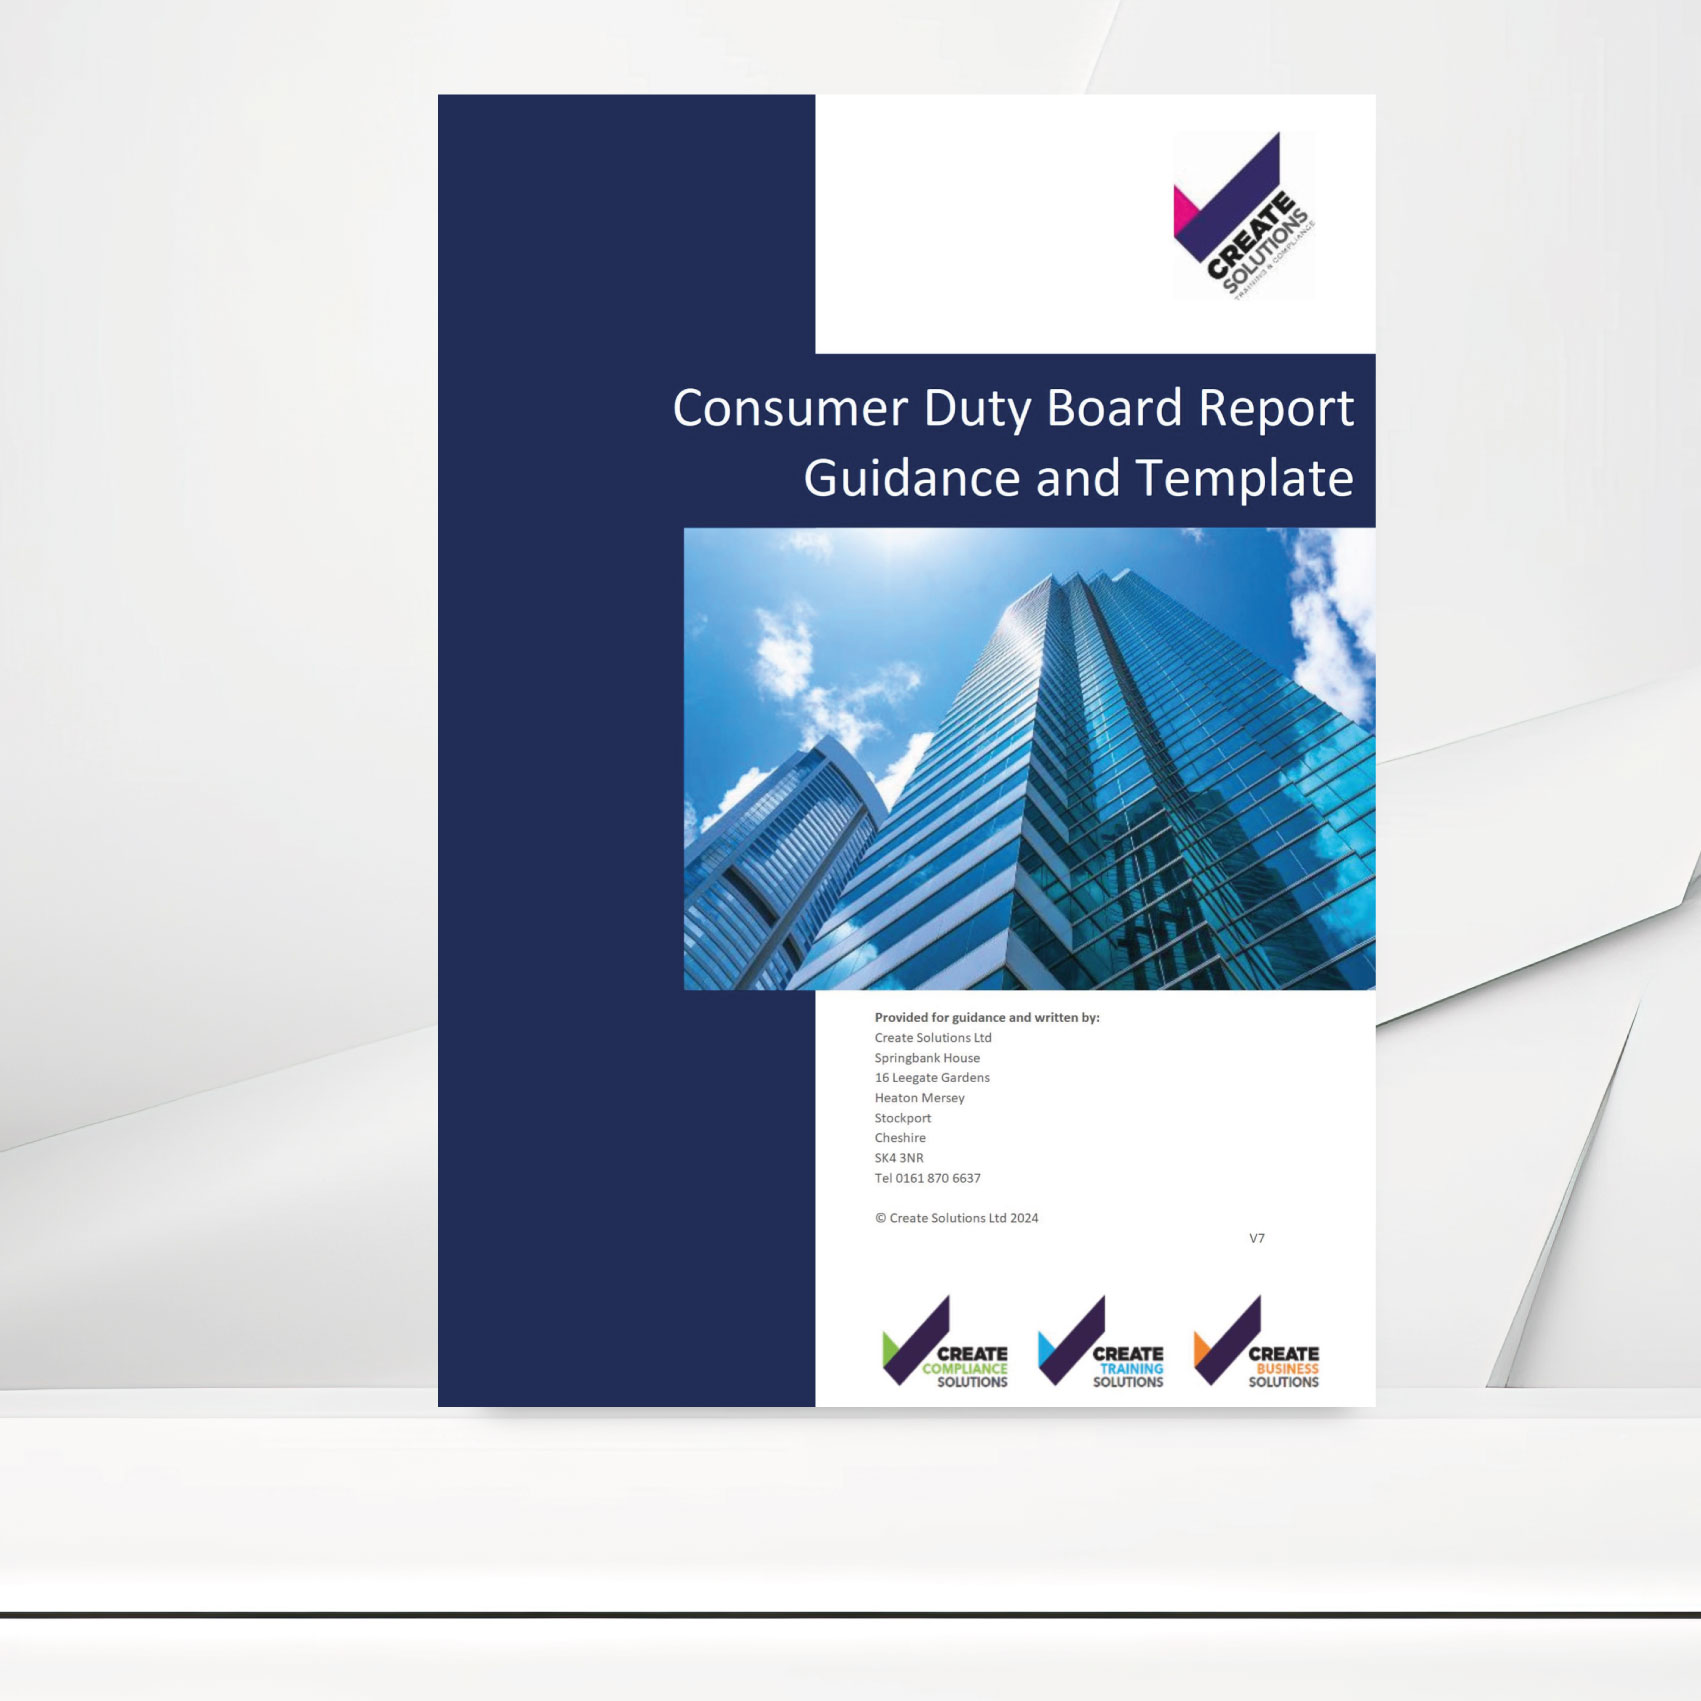 Consumer Duty Board Report – Guidance and Template